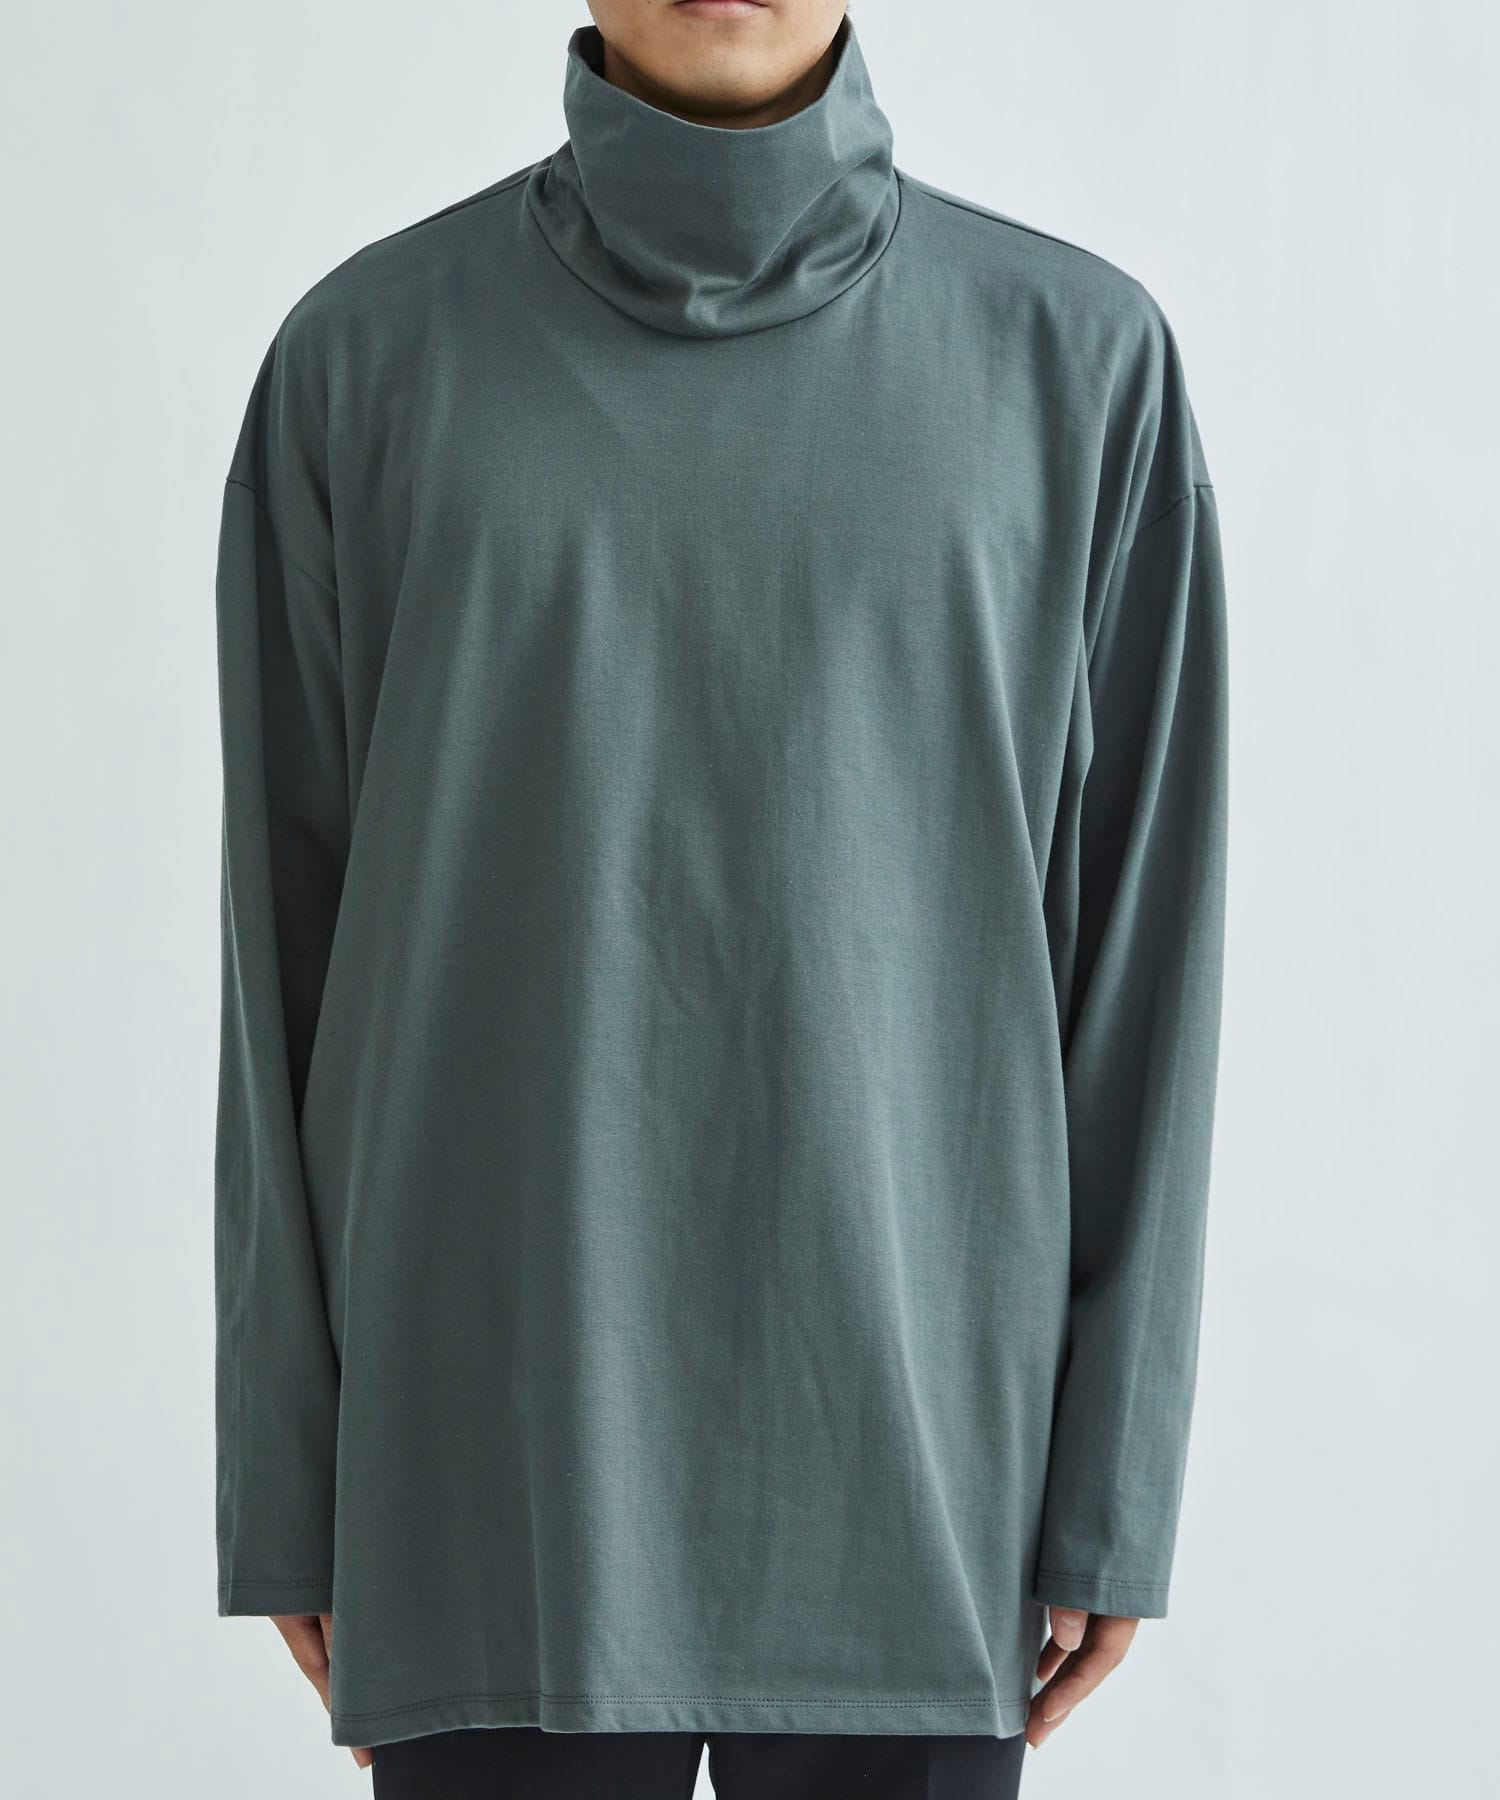 HEAVY T-CLOTH HIGH NECK LST LAD MUSICIAN